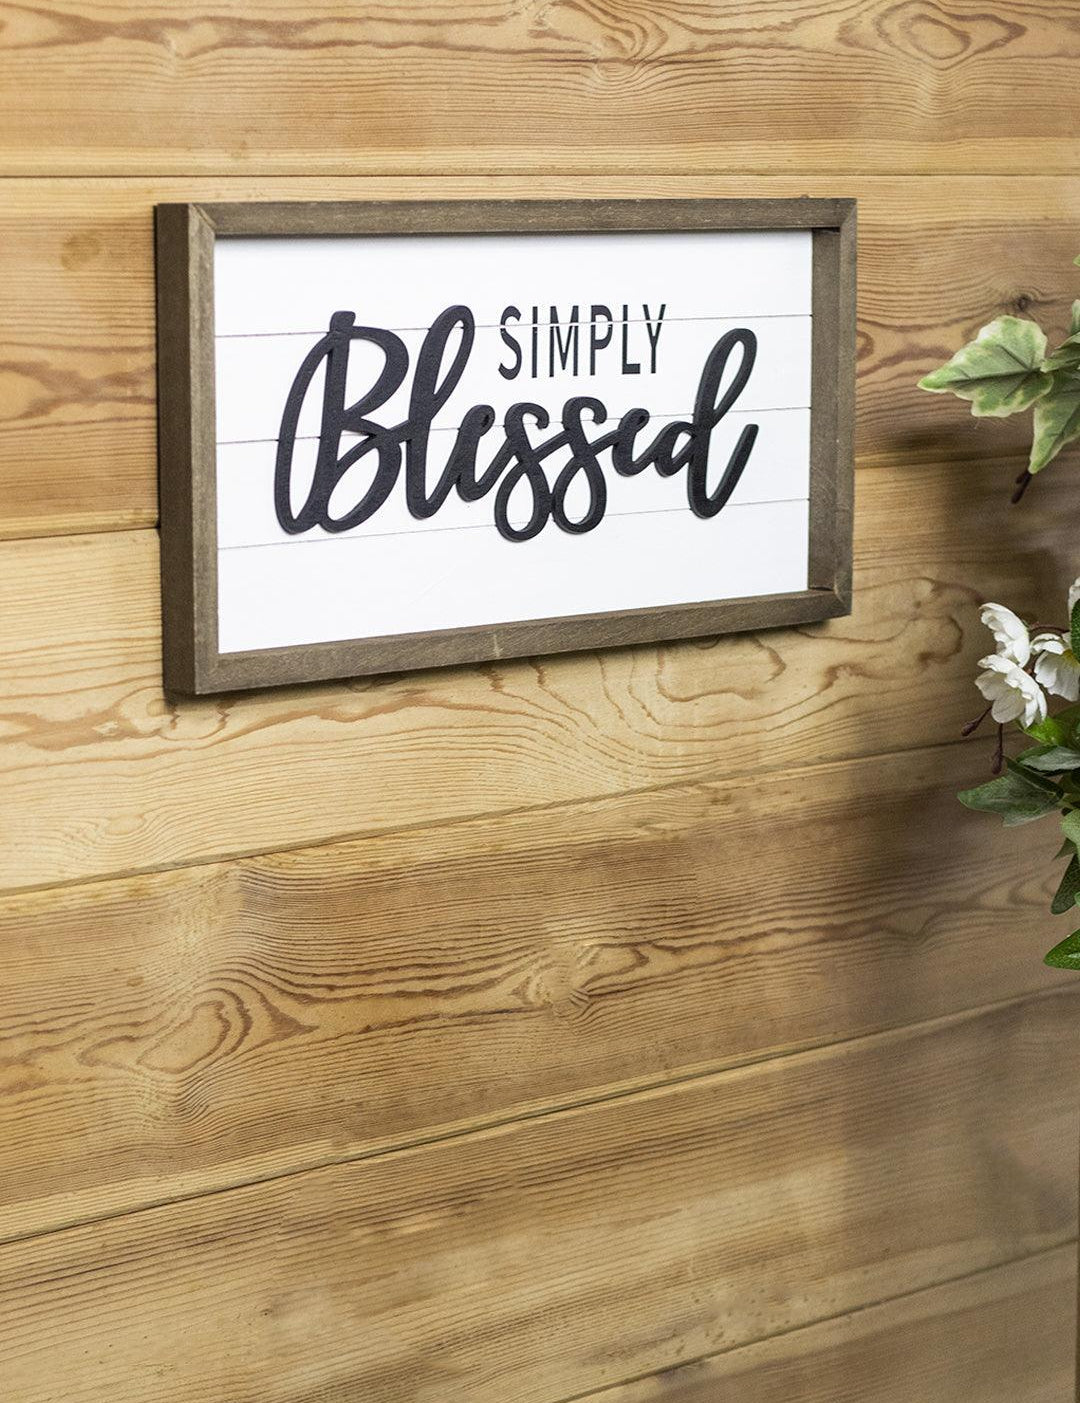 Decorative Wall Plaques - SIMPLY Blessed - MARKET 99